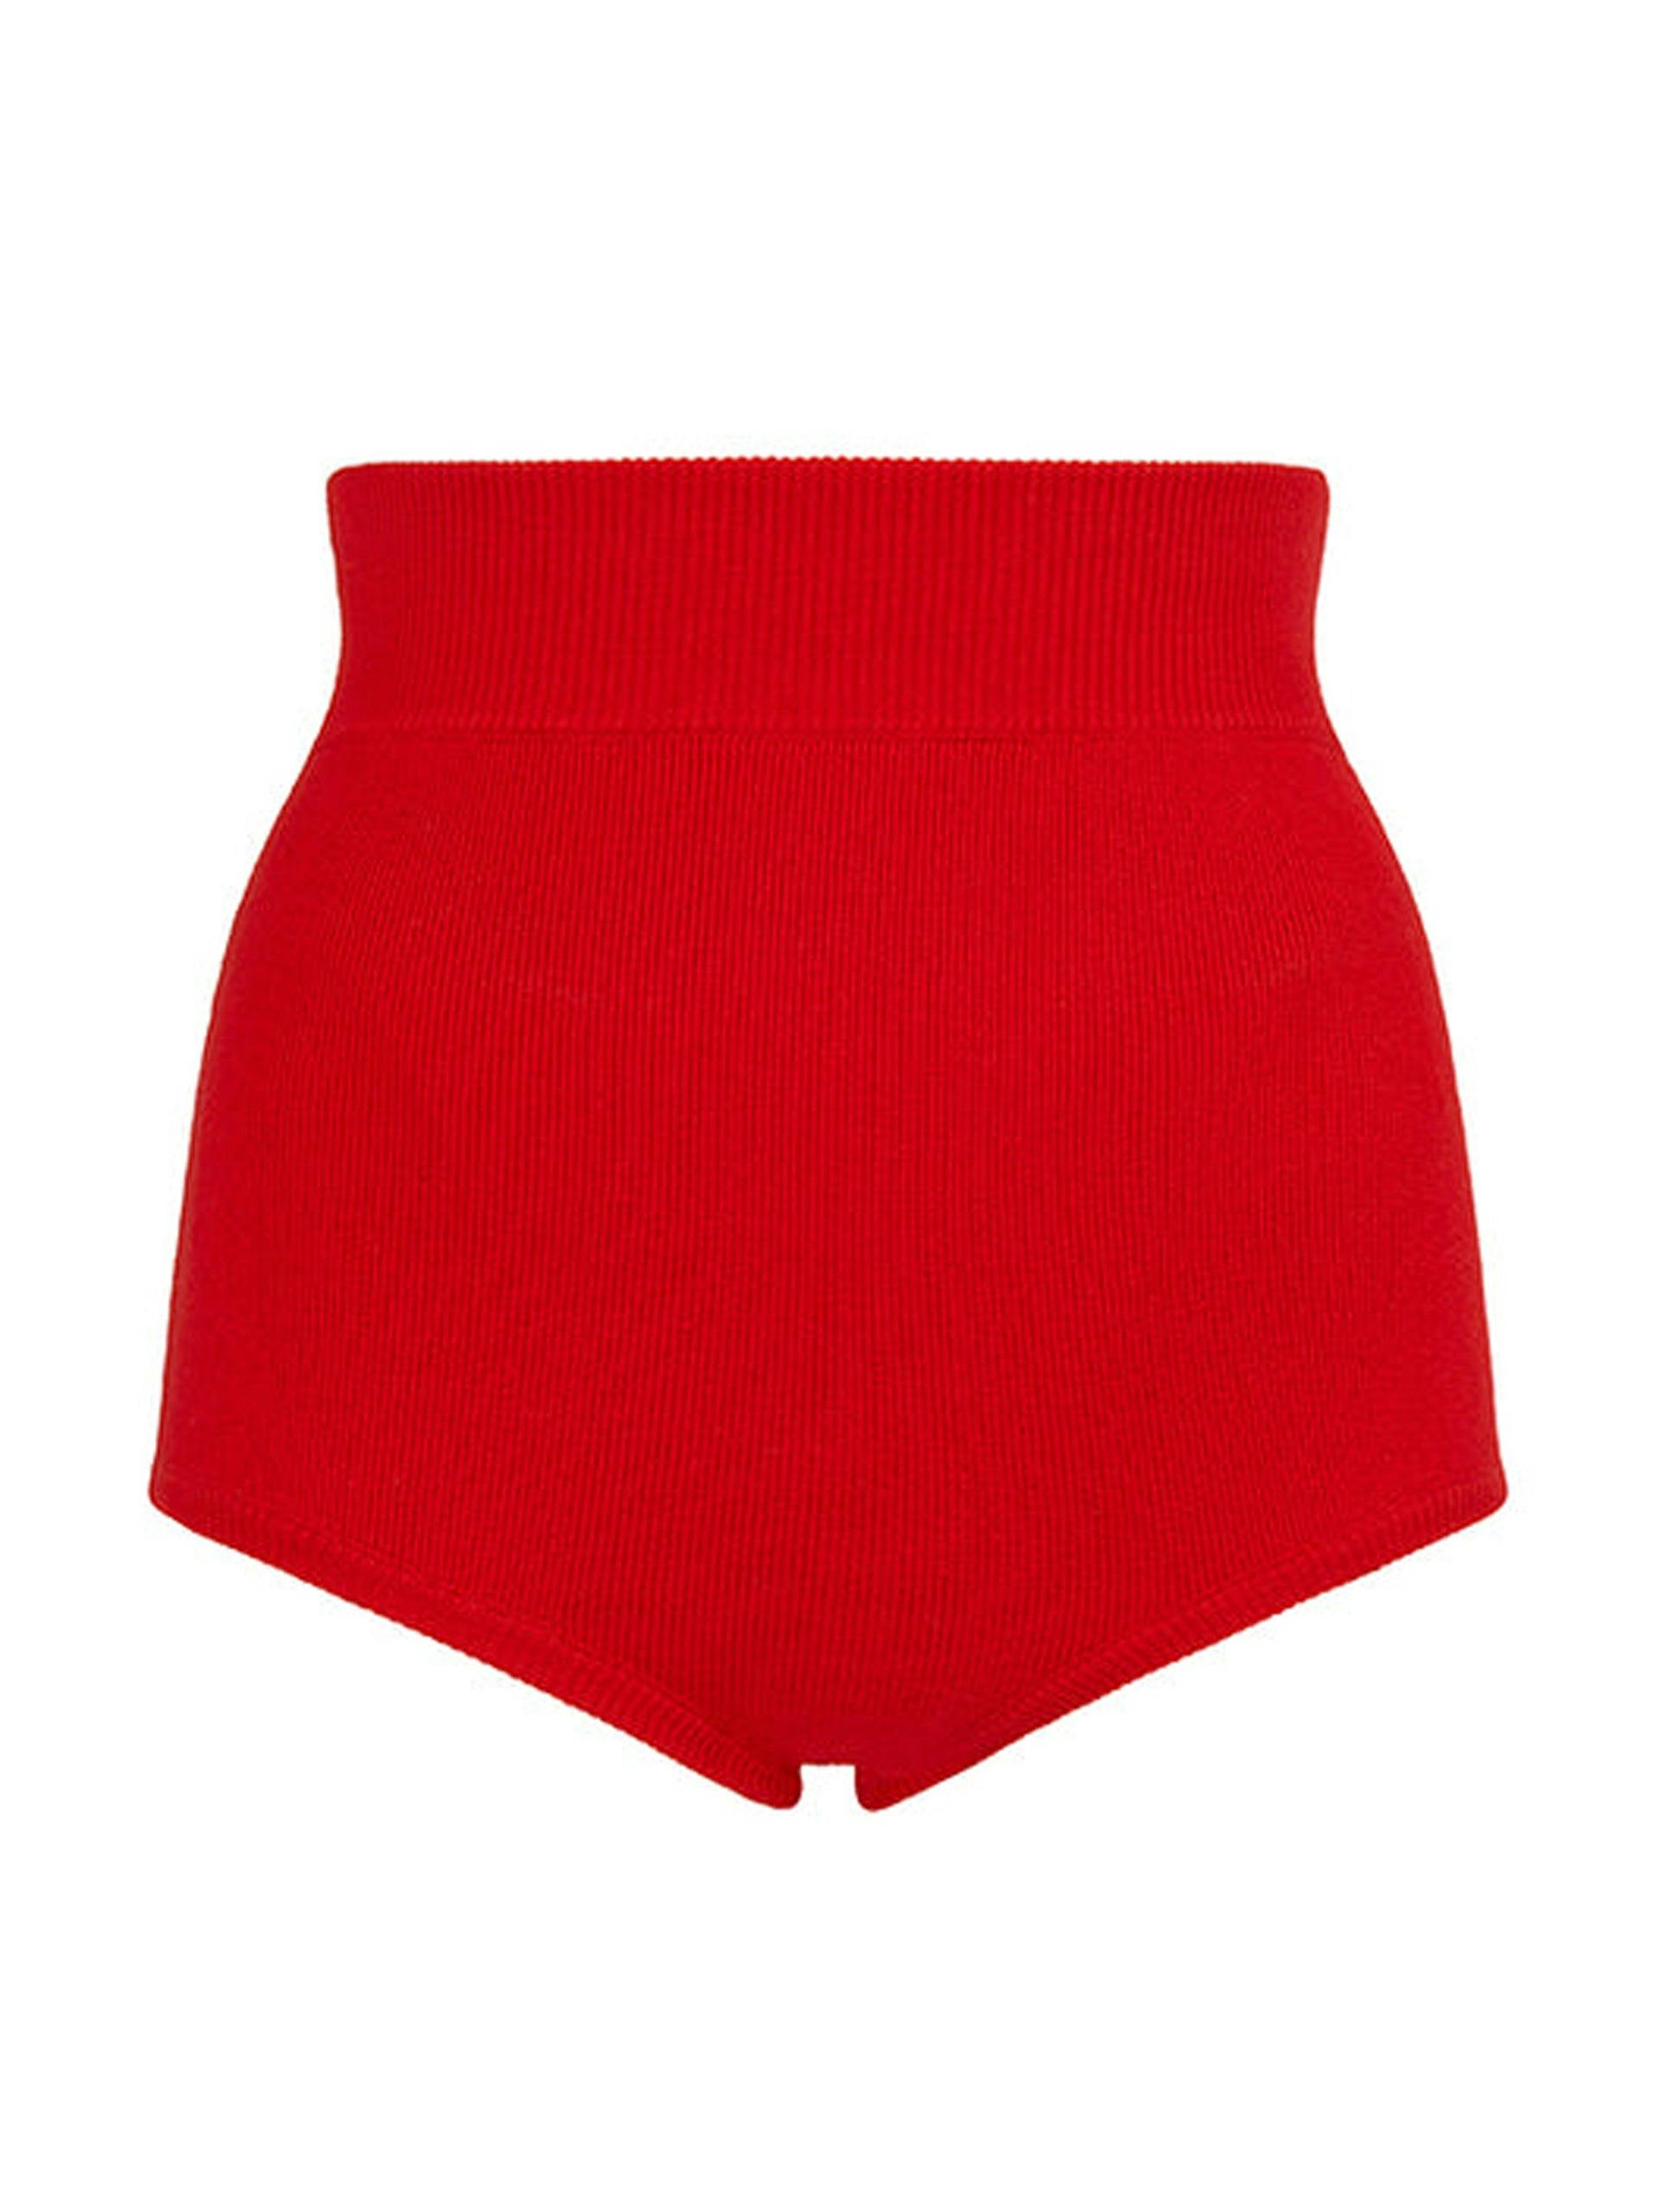 Red Gali knickers